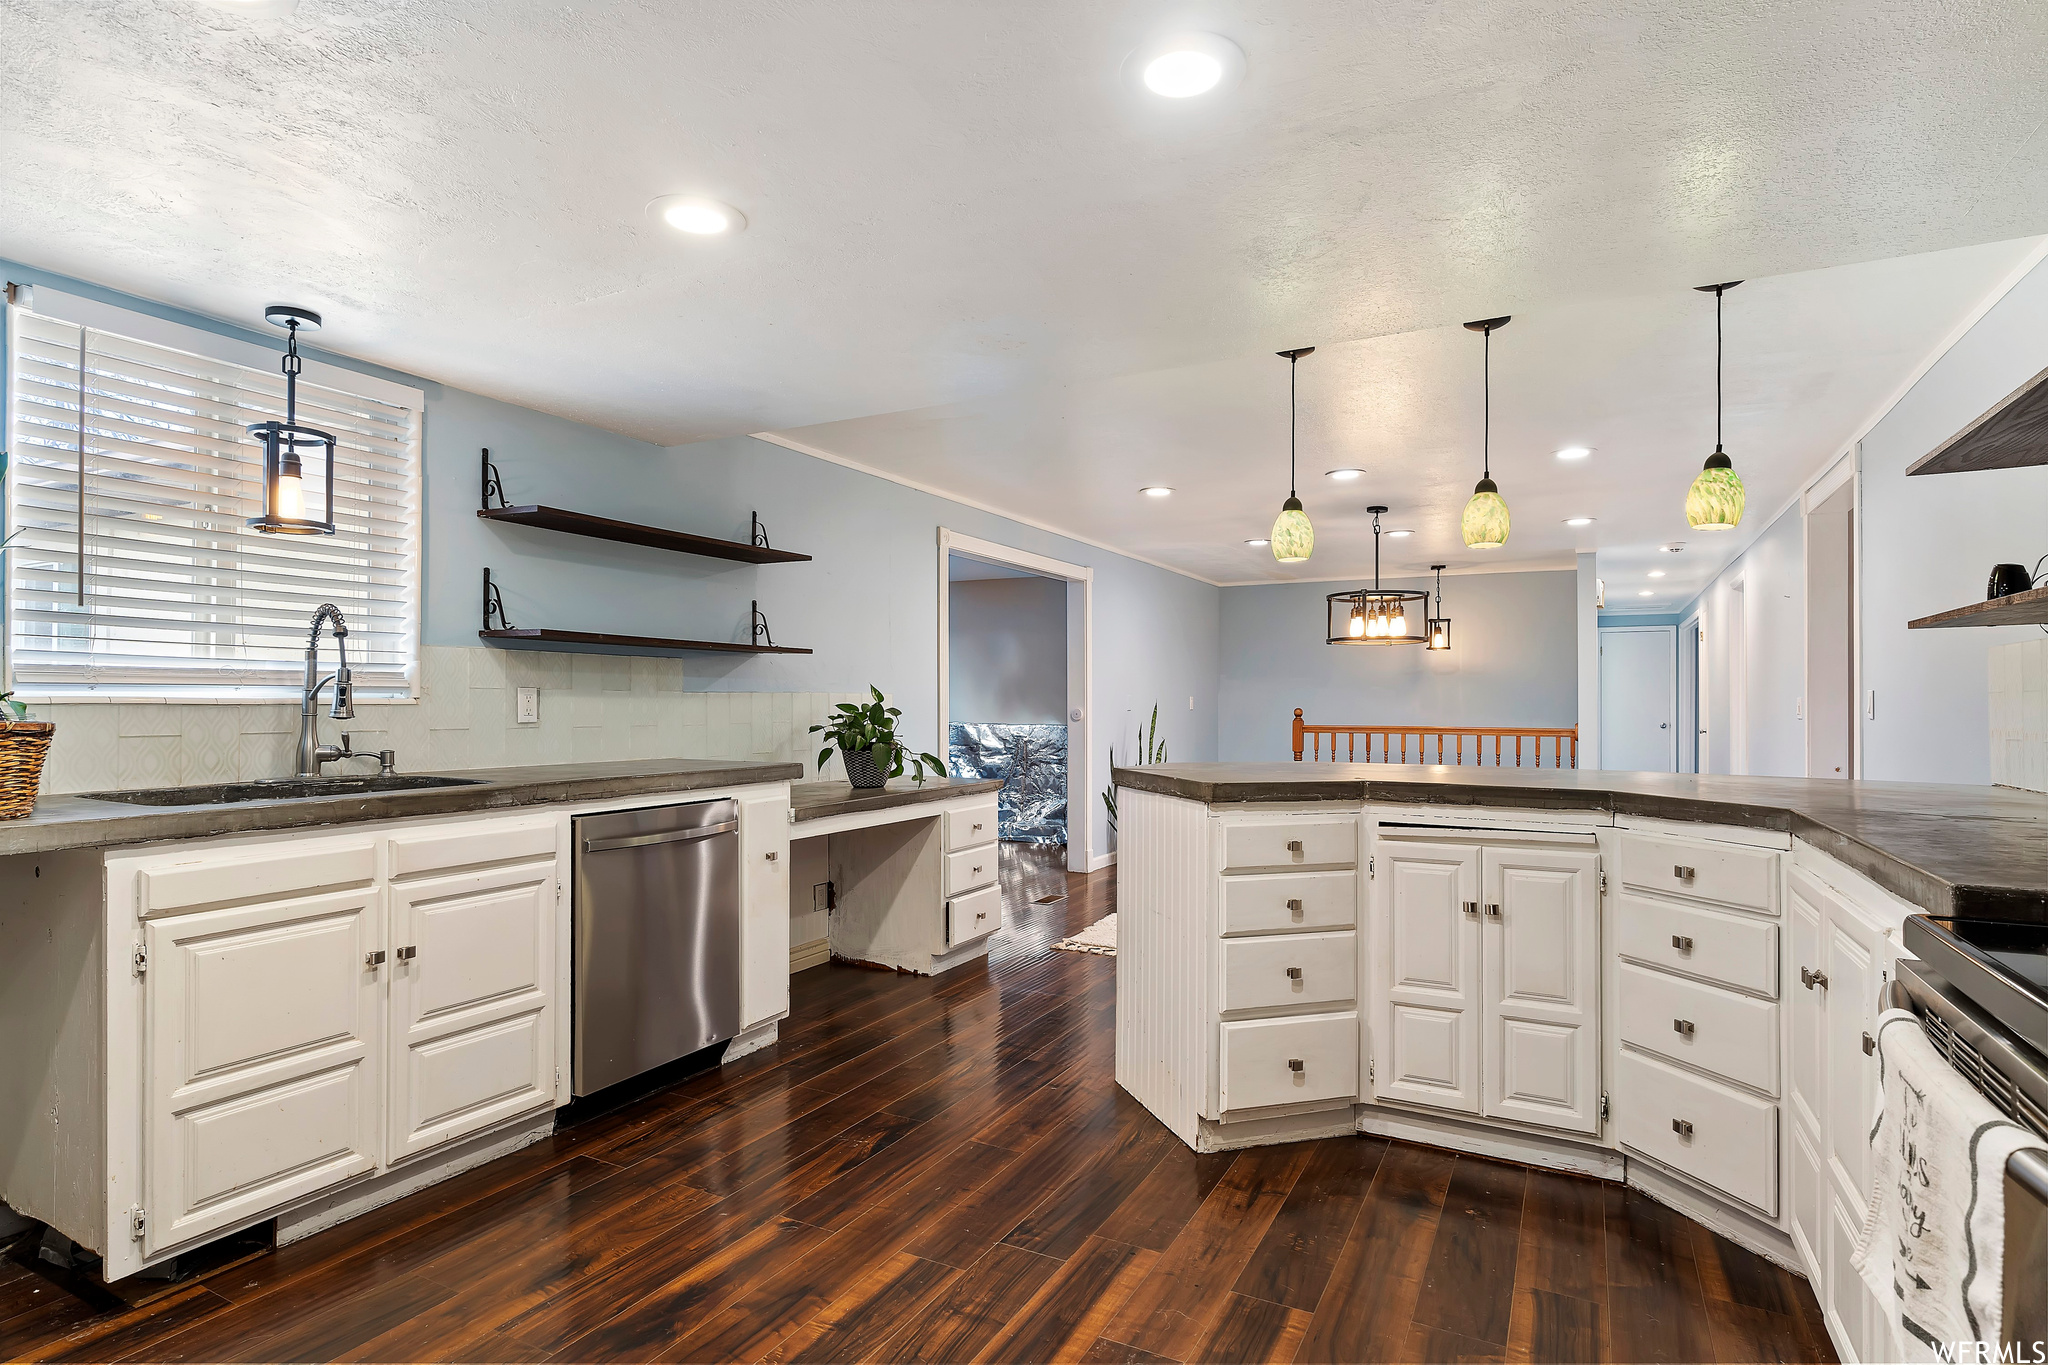 Kitchen featuring white cabinets, dark hardwood / wood-style floors, appliances with stainless steel finishes, and sink